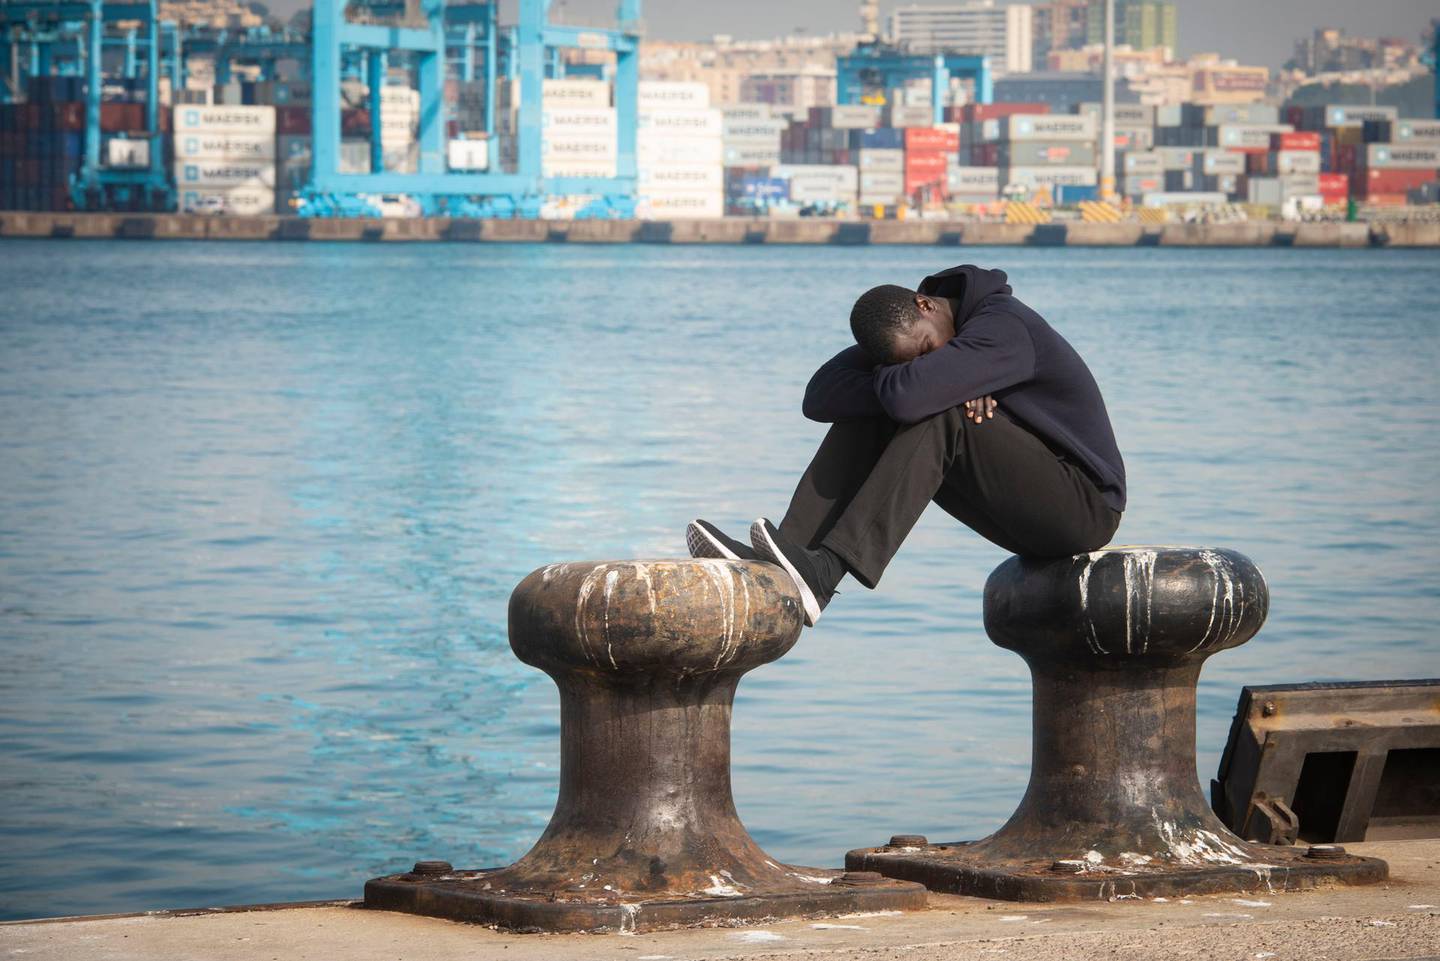 A migrant rests at the dock of the port of Algeciras, southern Spain, after being rescued by Spain's Maritime Rescue Service in the Strait of Gibraltar on Wednesday, Aug. 1, 2018. Spain's foreign minister says the European Union's executive branch has allocated 55 million euros ($64.2 million) to manage an upsurge of migrant arrivals mostly from Morocco. With nearly 23,000 arrivals recorded so far, Spain has become this year the main entry point into Europe for migrants crossing the Mediterranean Sea by boat. (AP Photo/Marcos Moreno)